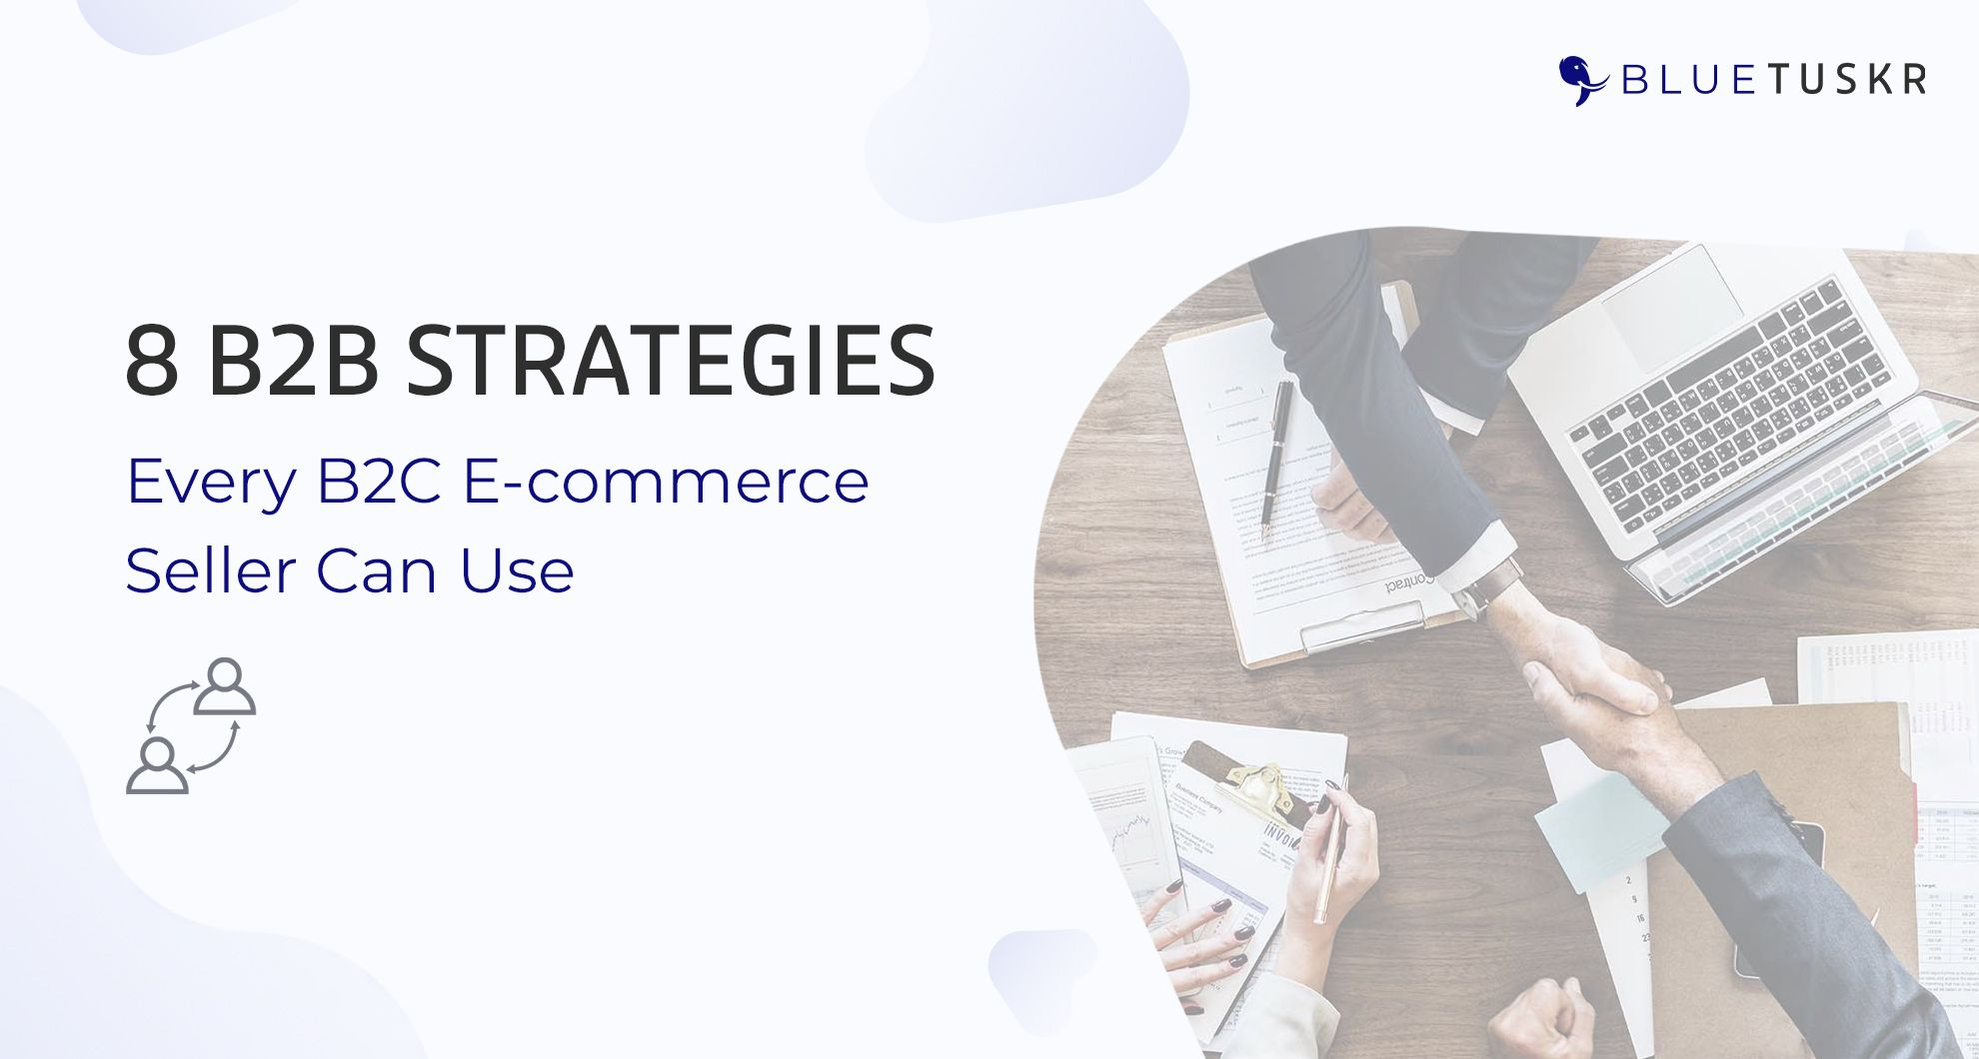 8 B2B Strategies Every B2C E-commerce Seller Can Use